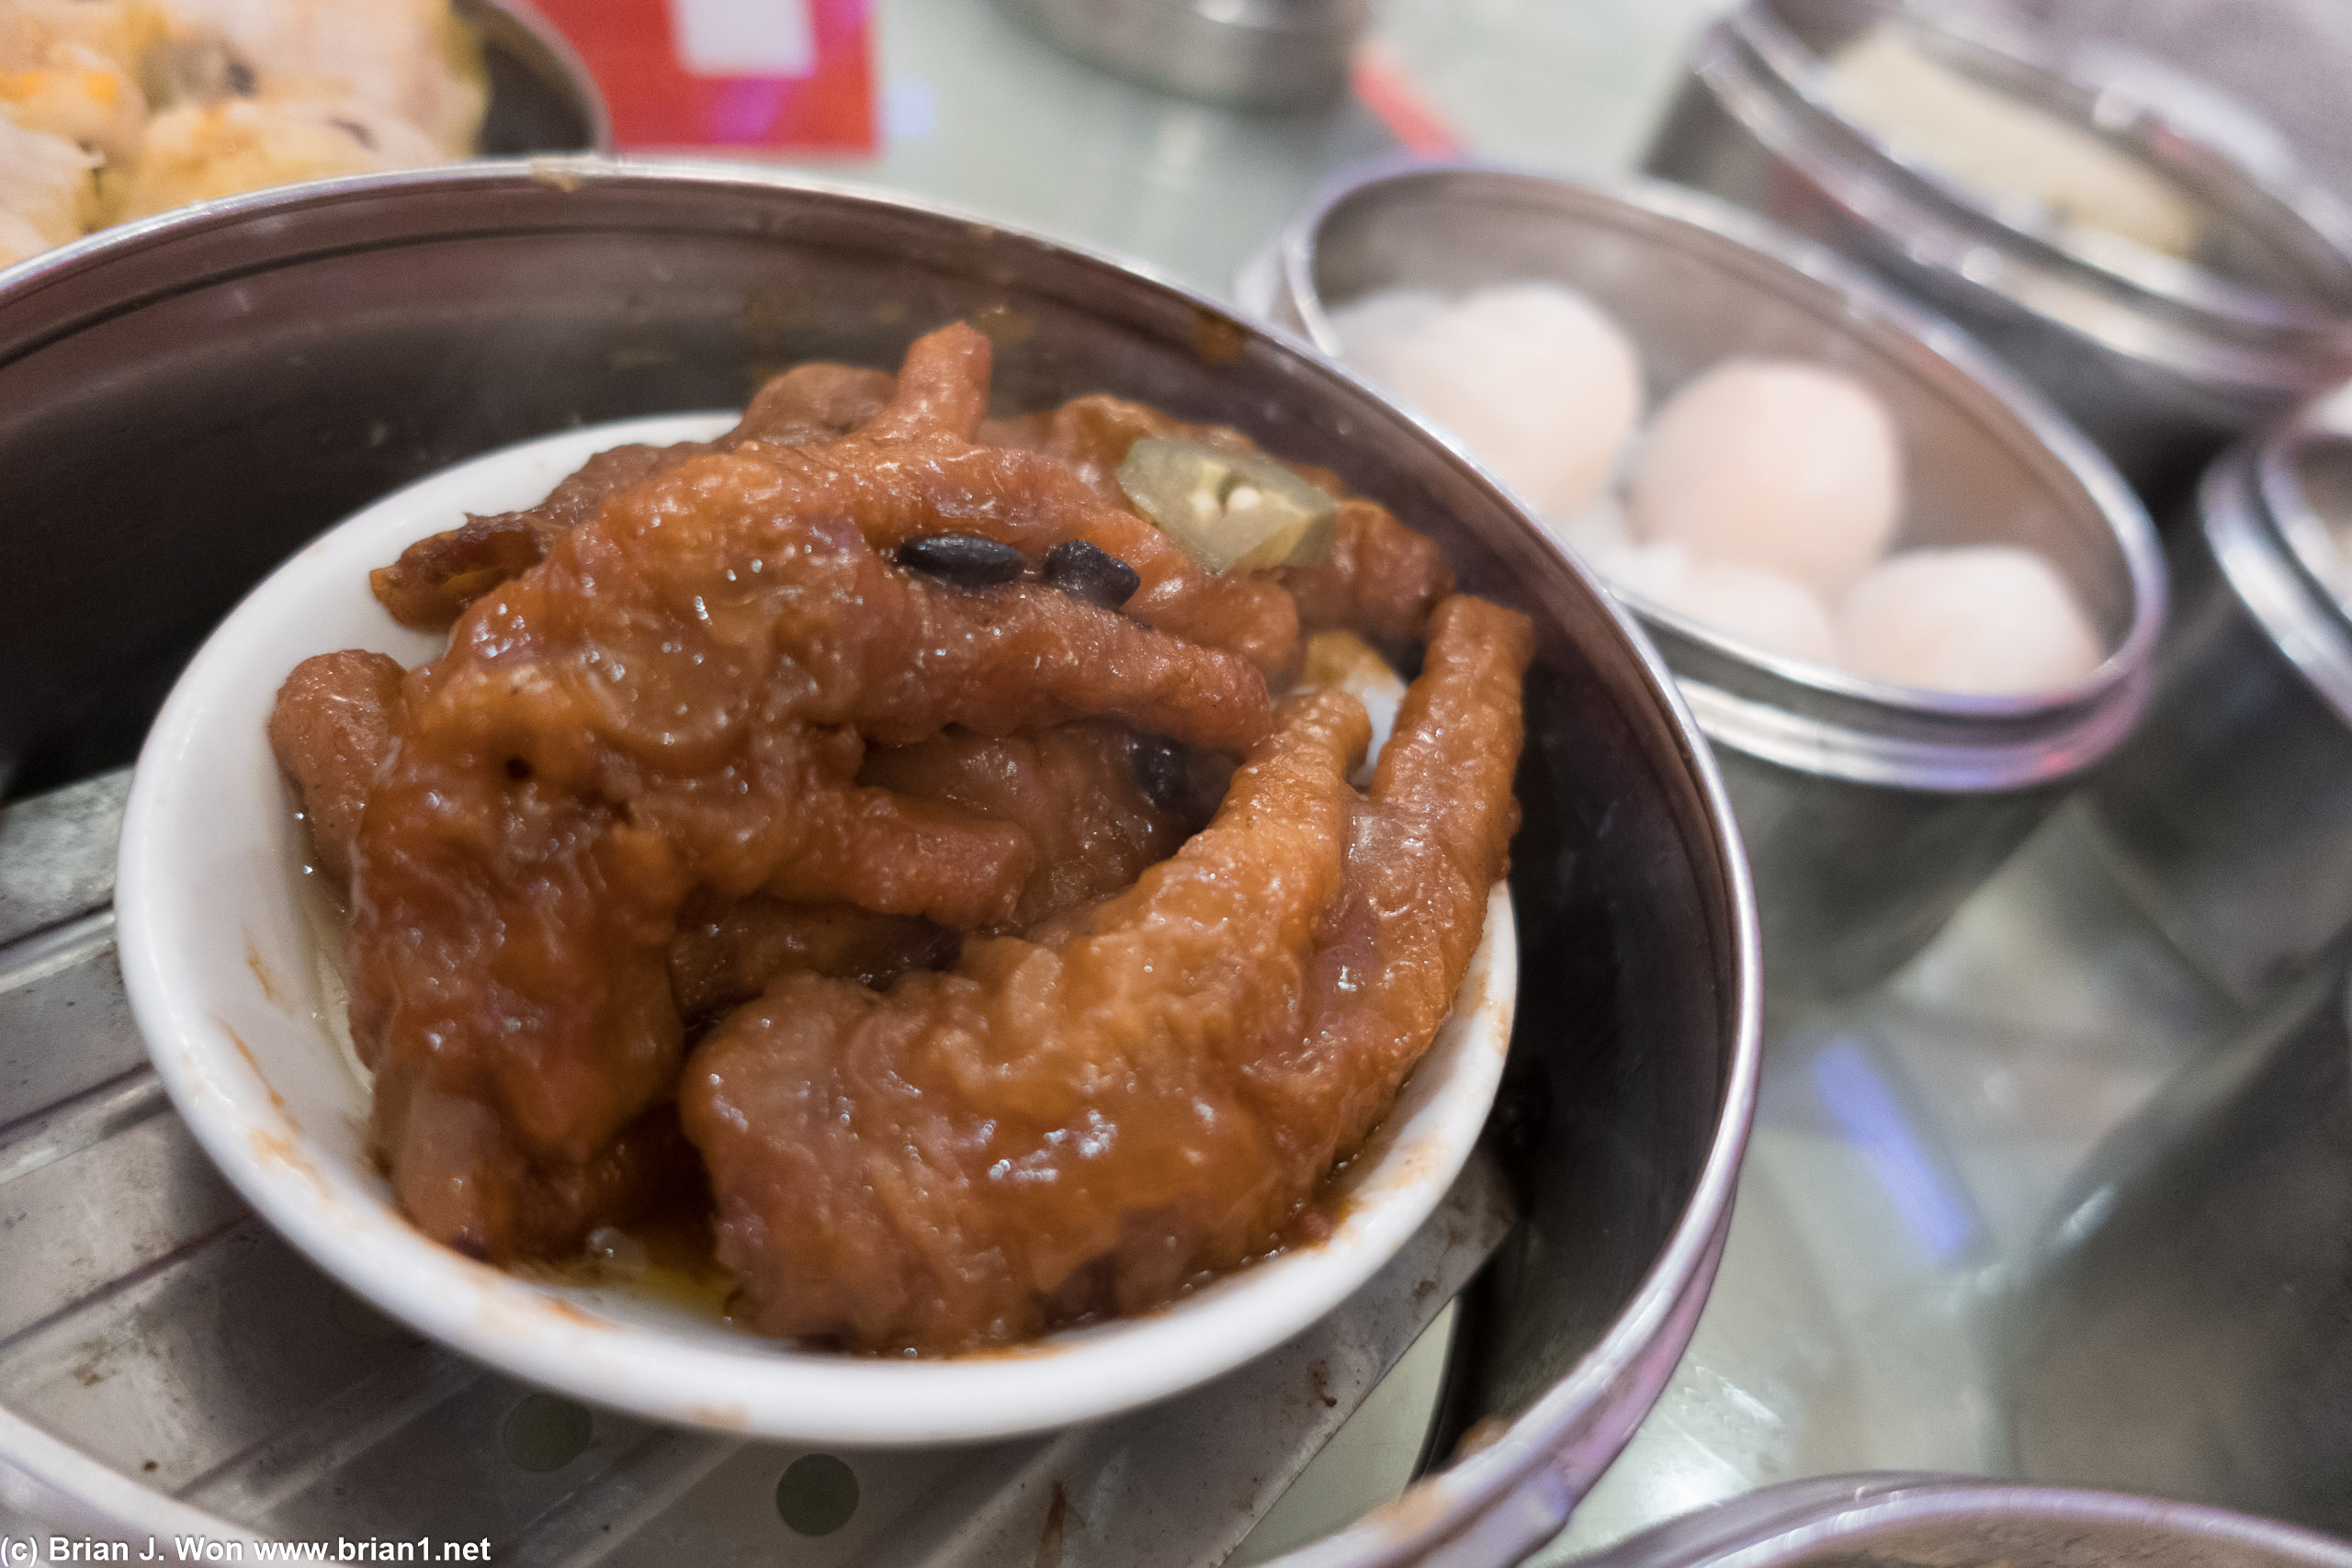 Feng zhao. So glad to have chicken feet eaters.